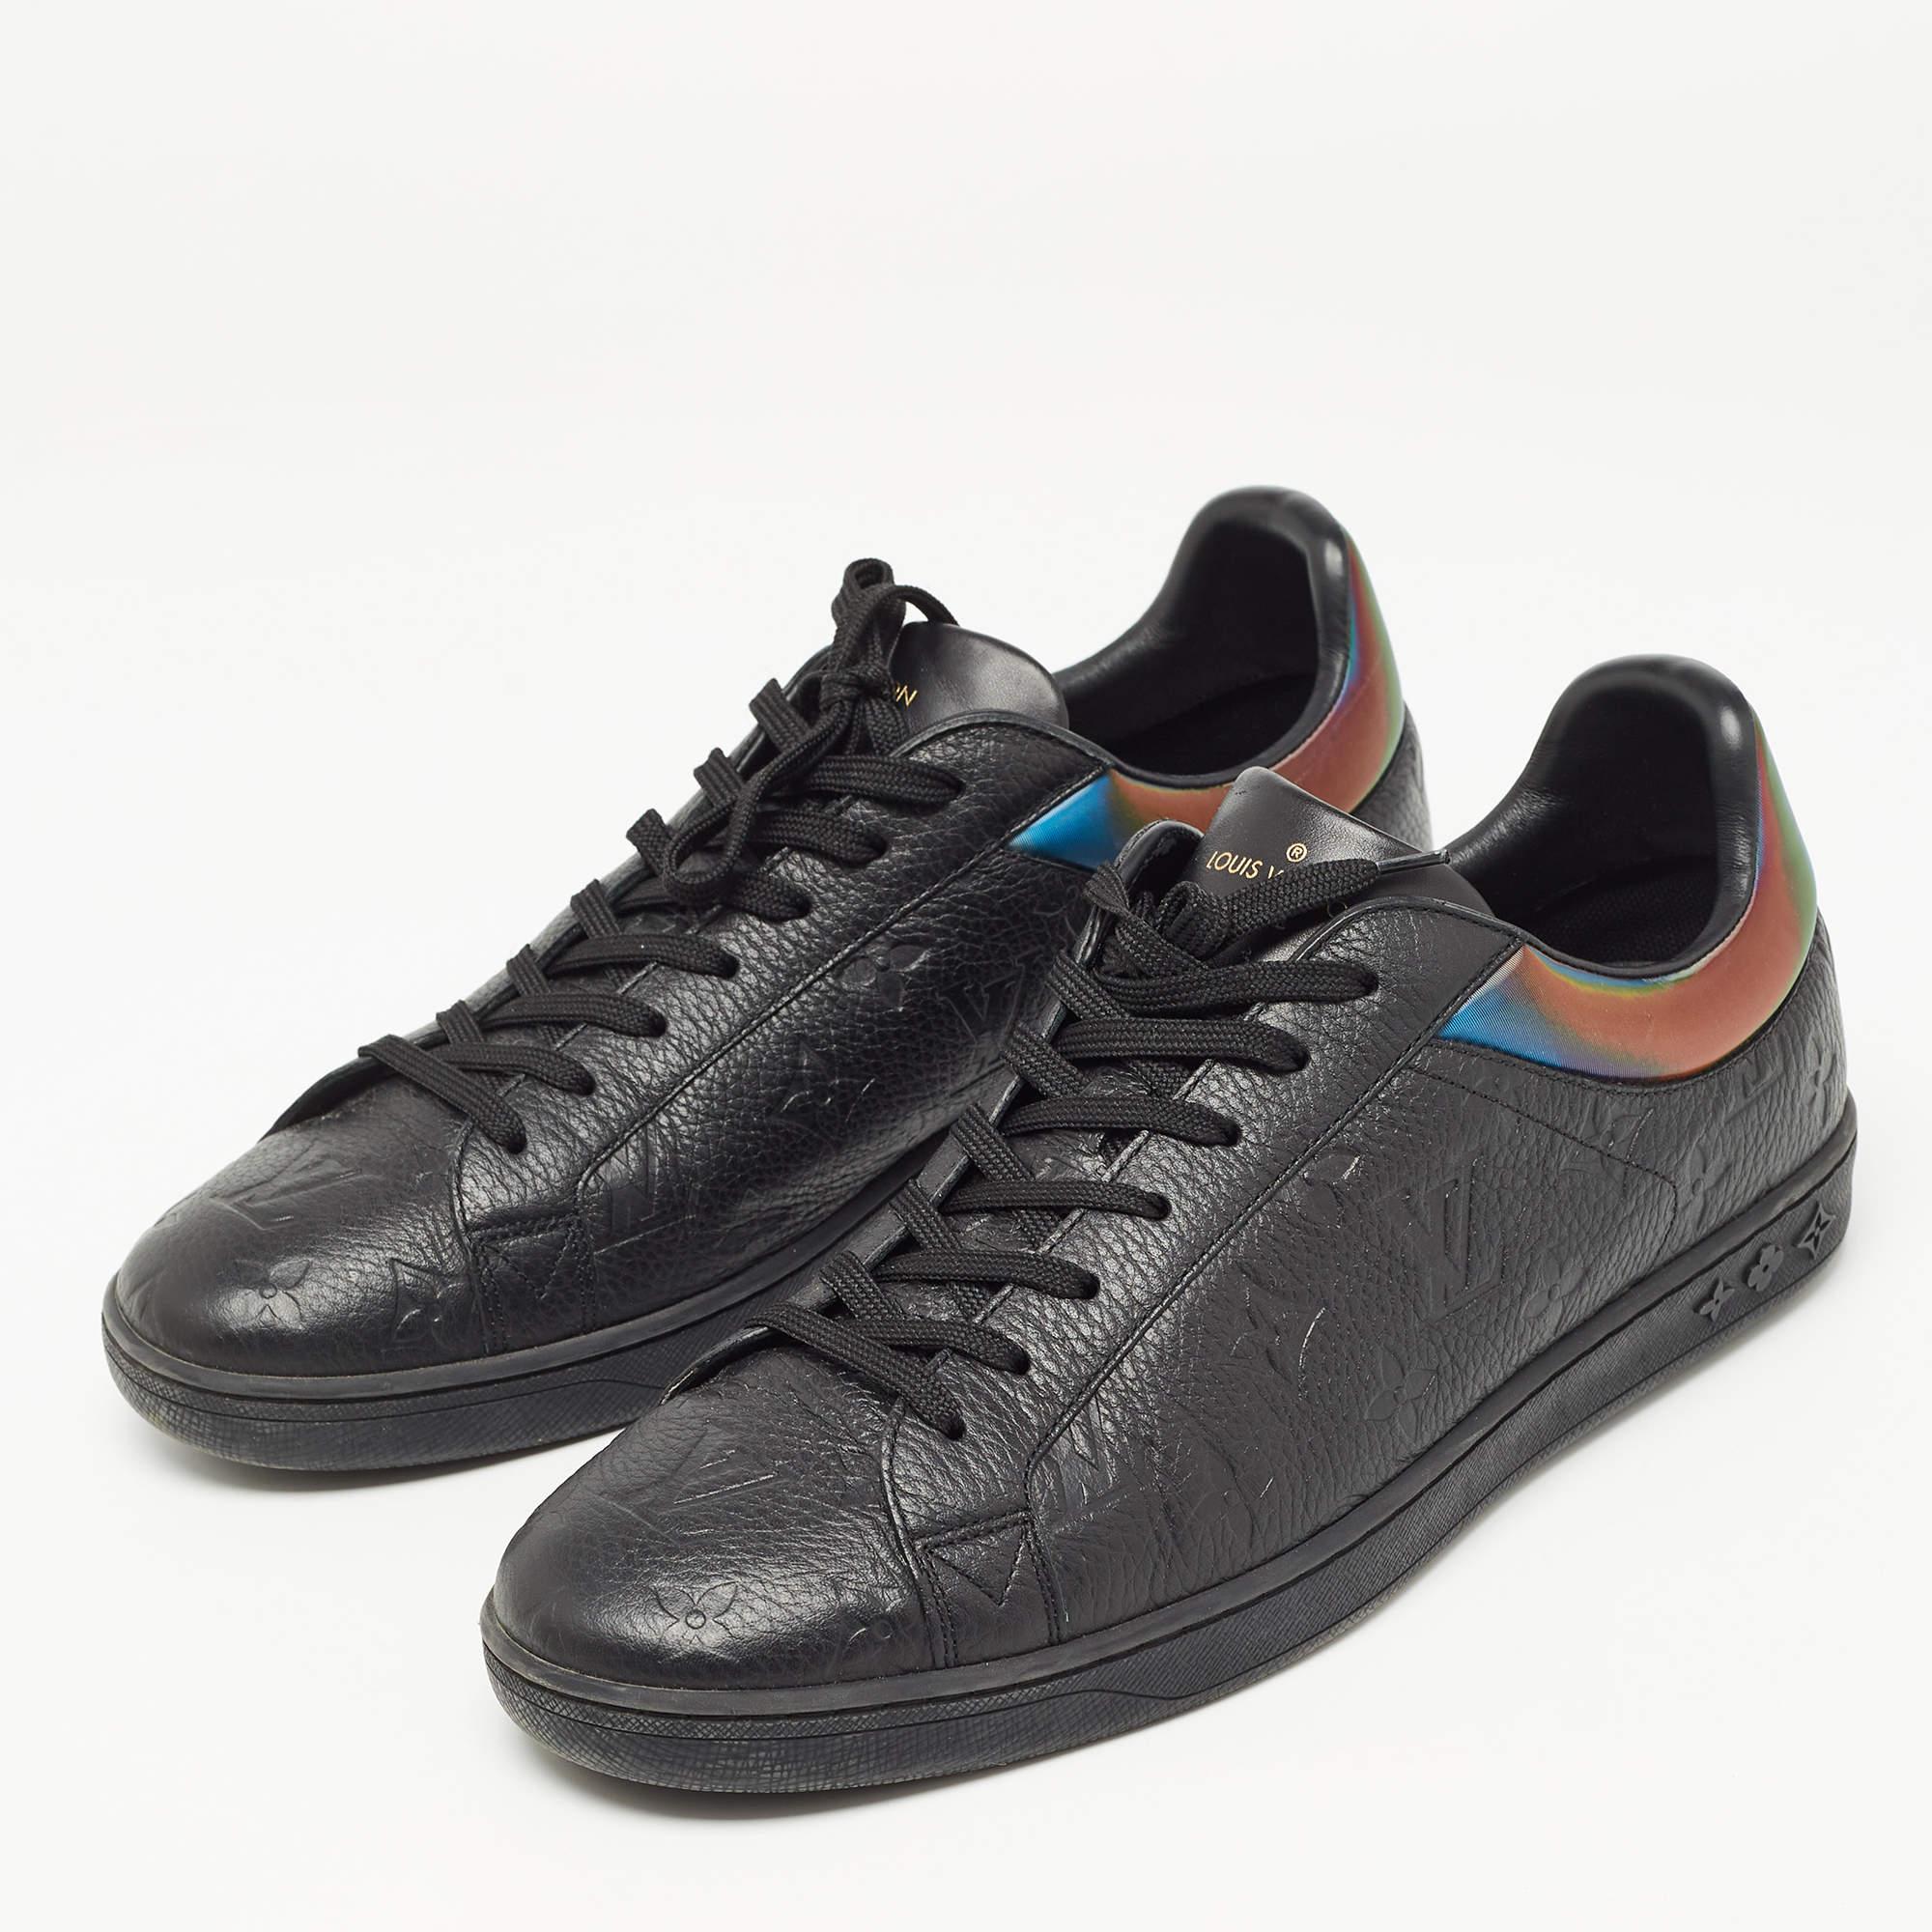 Upgrade your style with these LV sneakers. Meticulously designed for fashion and comfort, they're the ideal choice for a trendy and comfortable stride.

